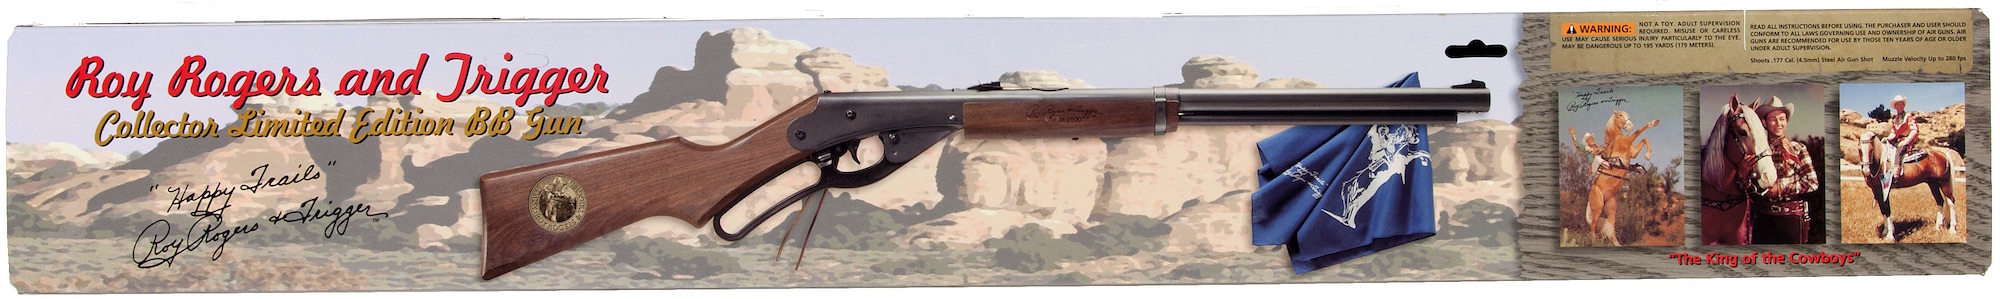 roy-rogers-and-trigger-limited-edition-daisy-bb-gun-rifle